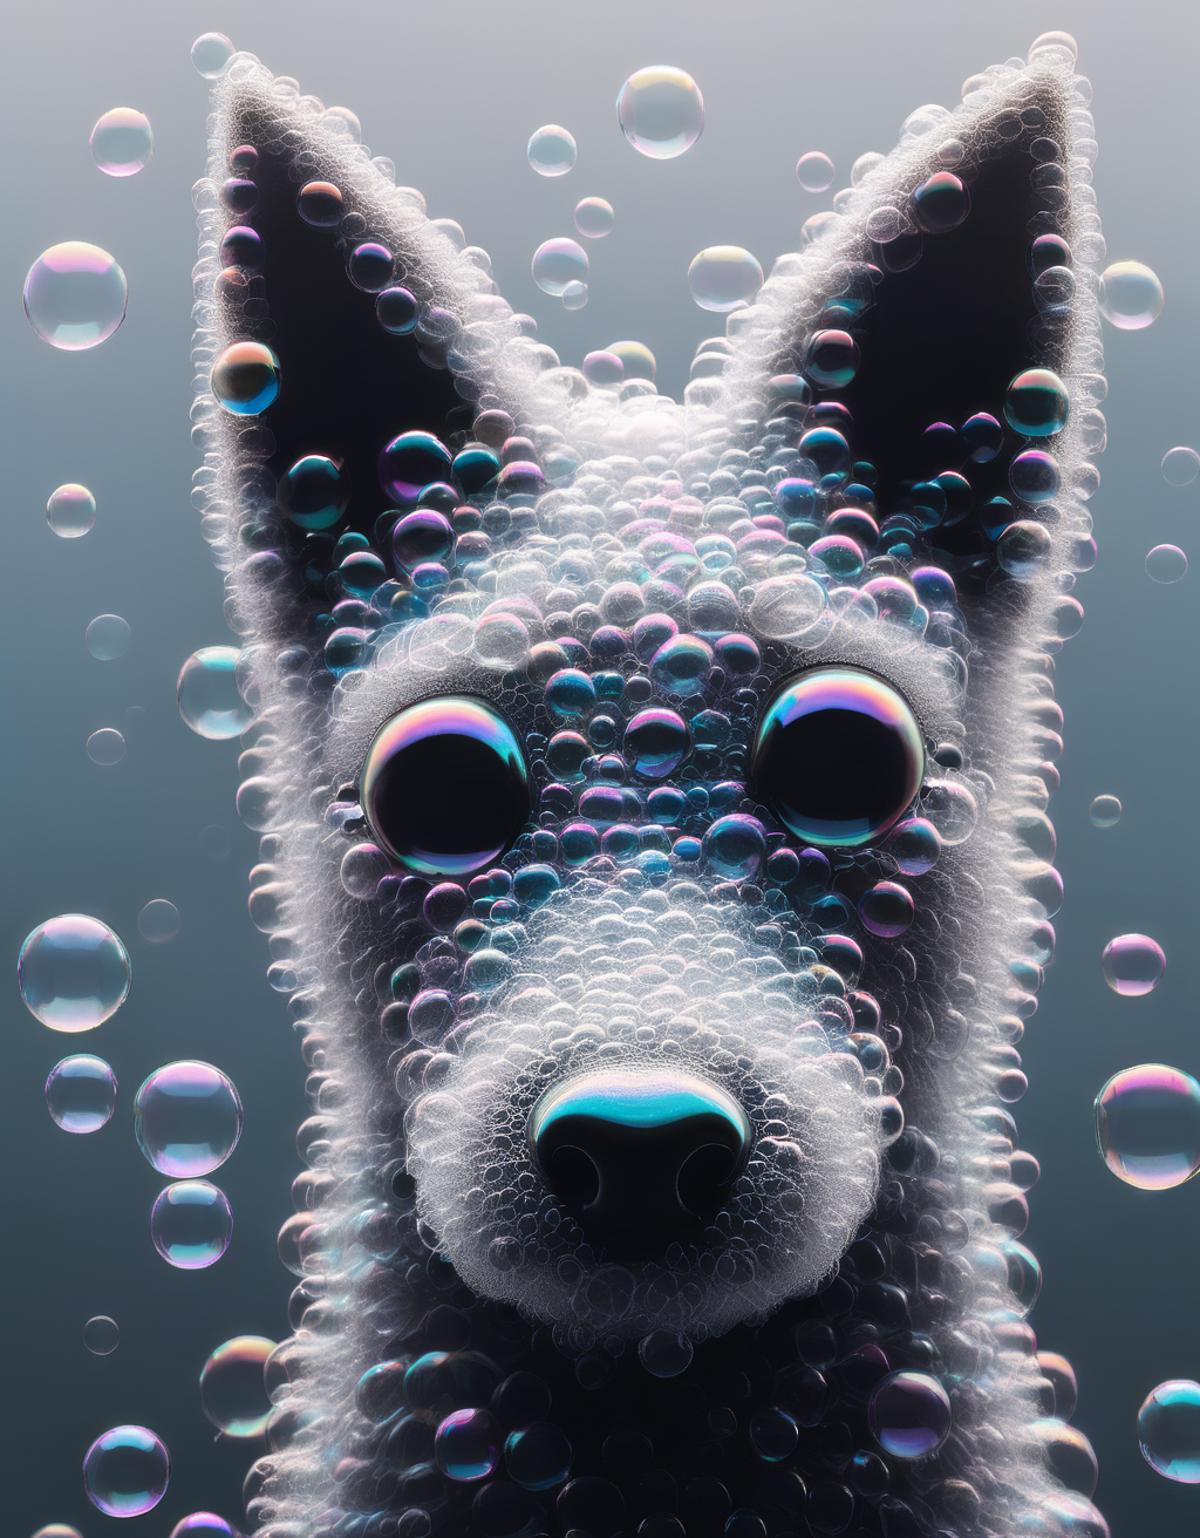 A dog's face covered in bubbles and a purple background.